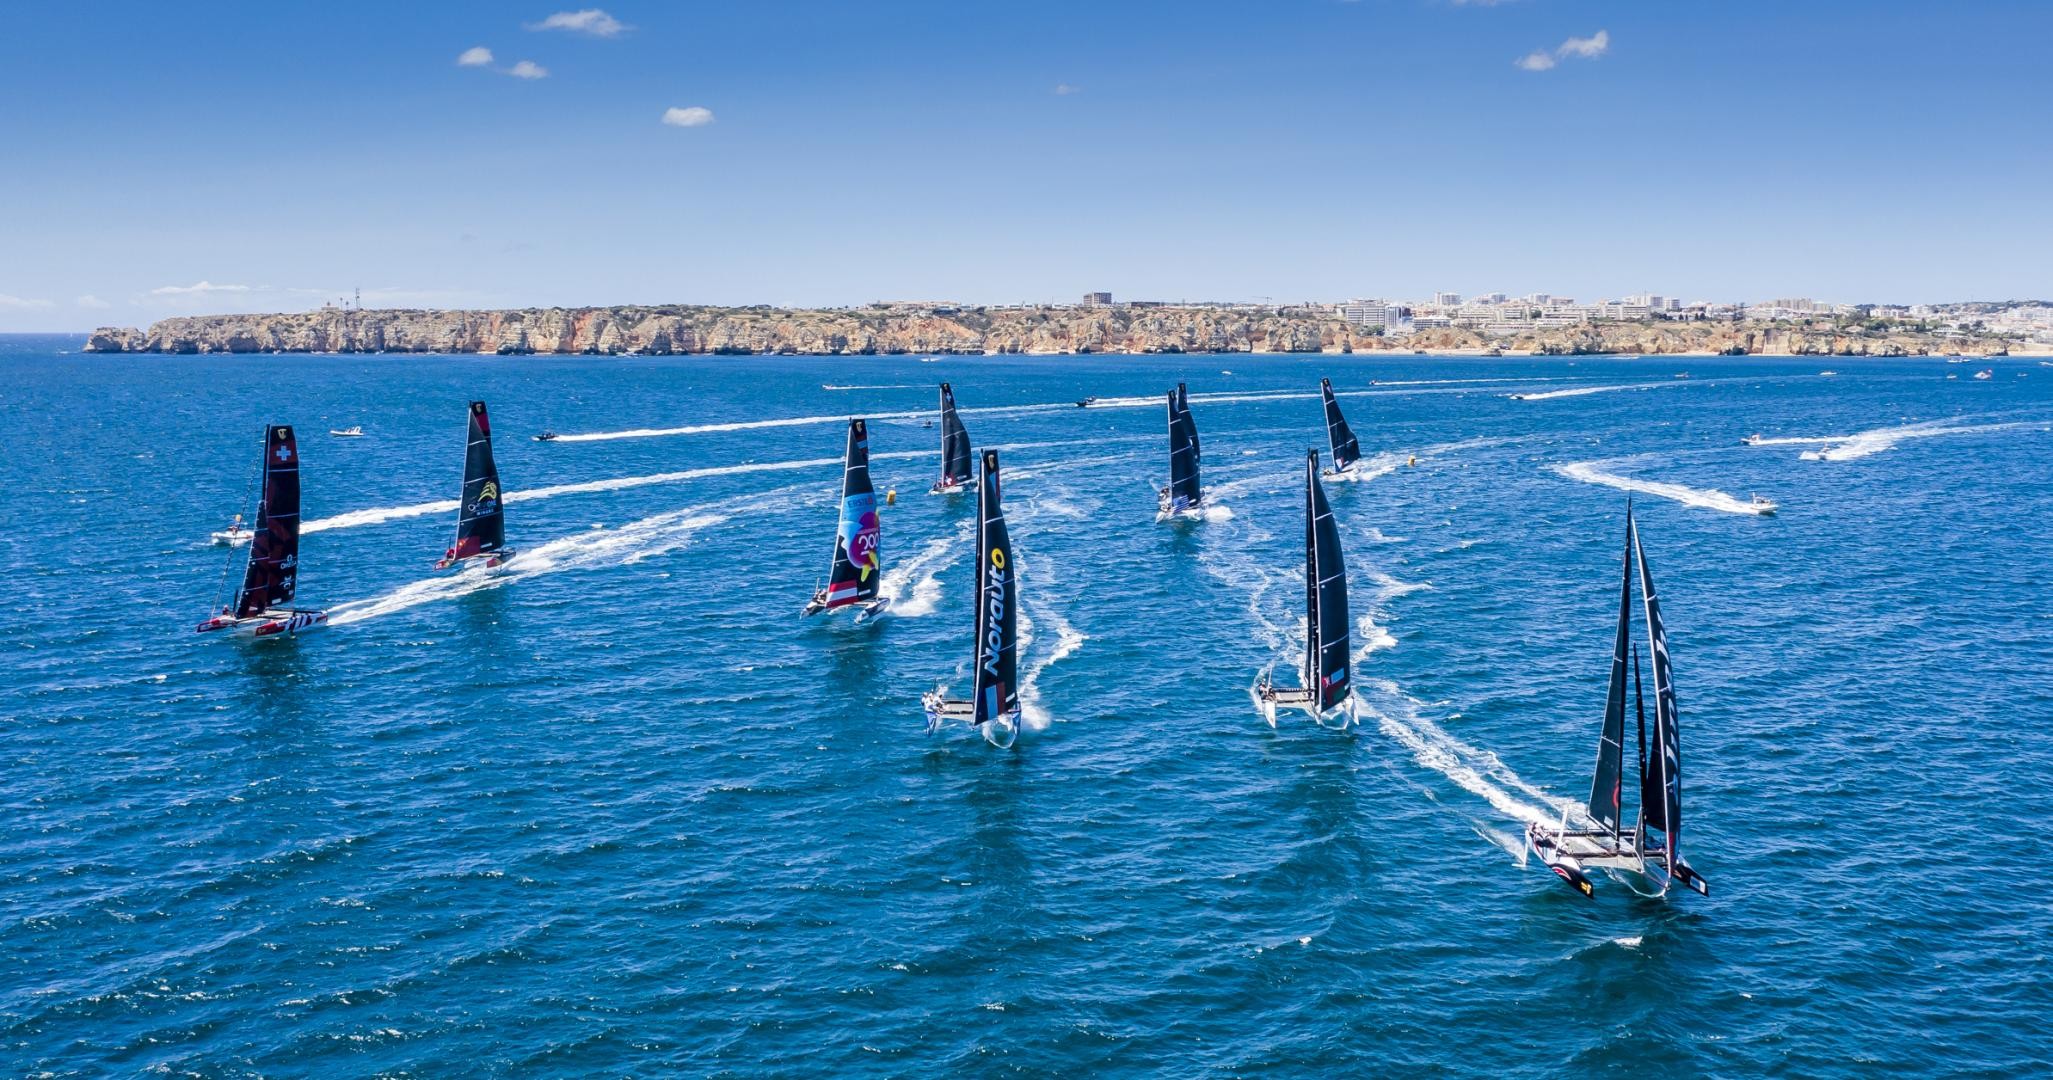 The GC32s will return to Lagos for a third occasion this year, following their World Championship in 2019